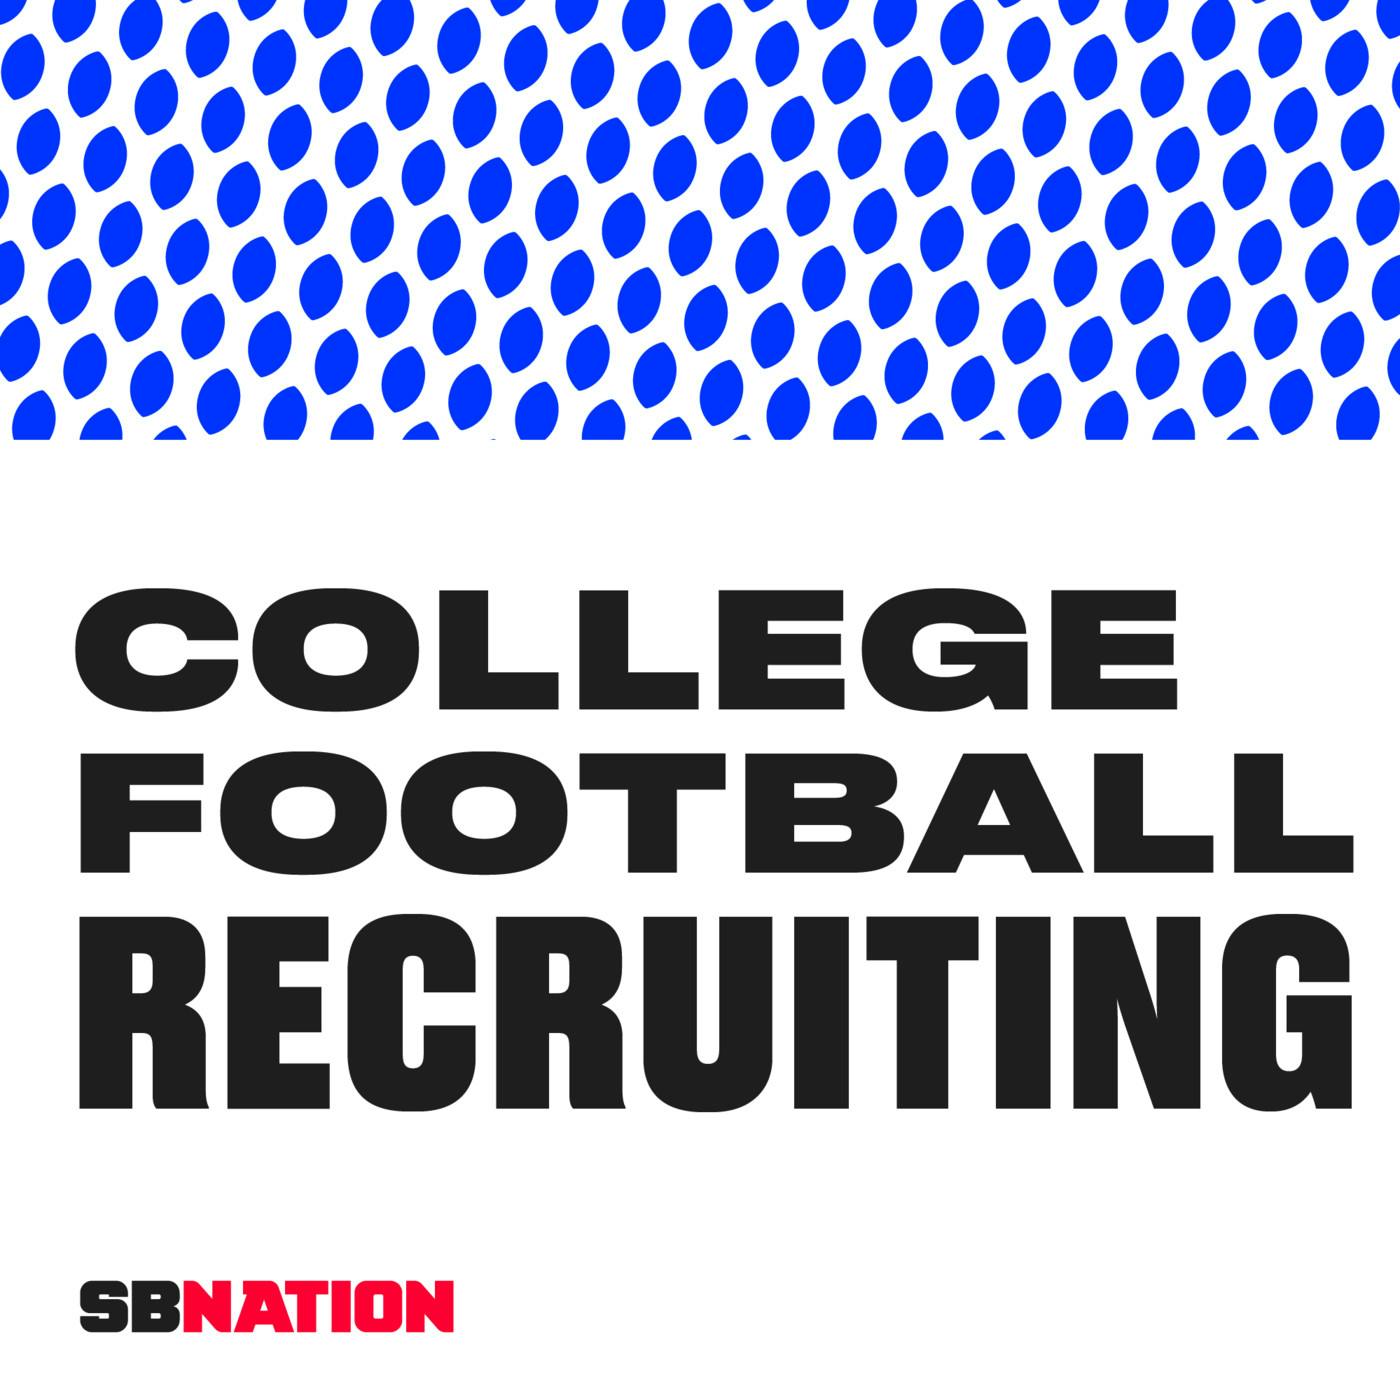 Recruiting visiting for big games, rivalries renewed, hot seat